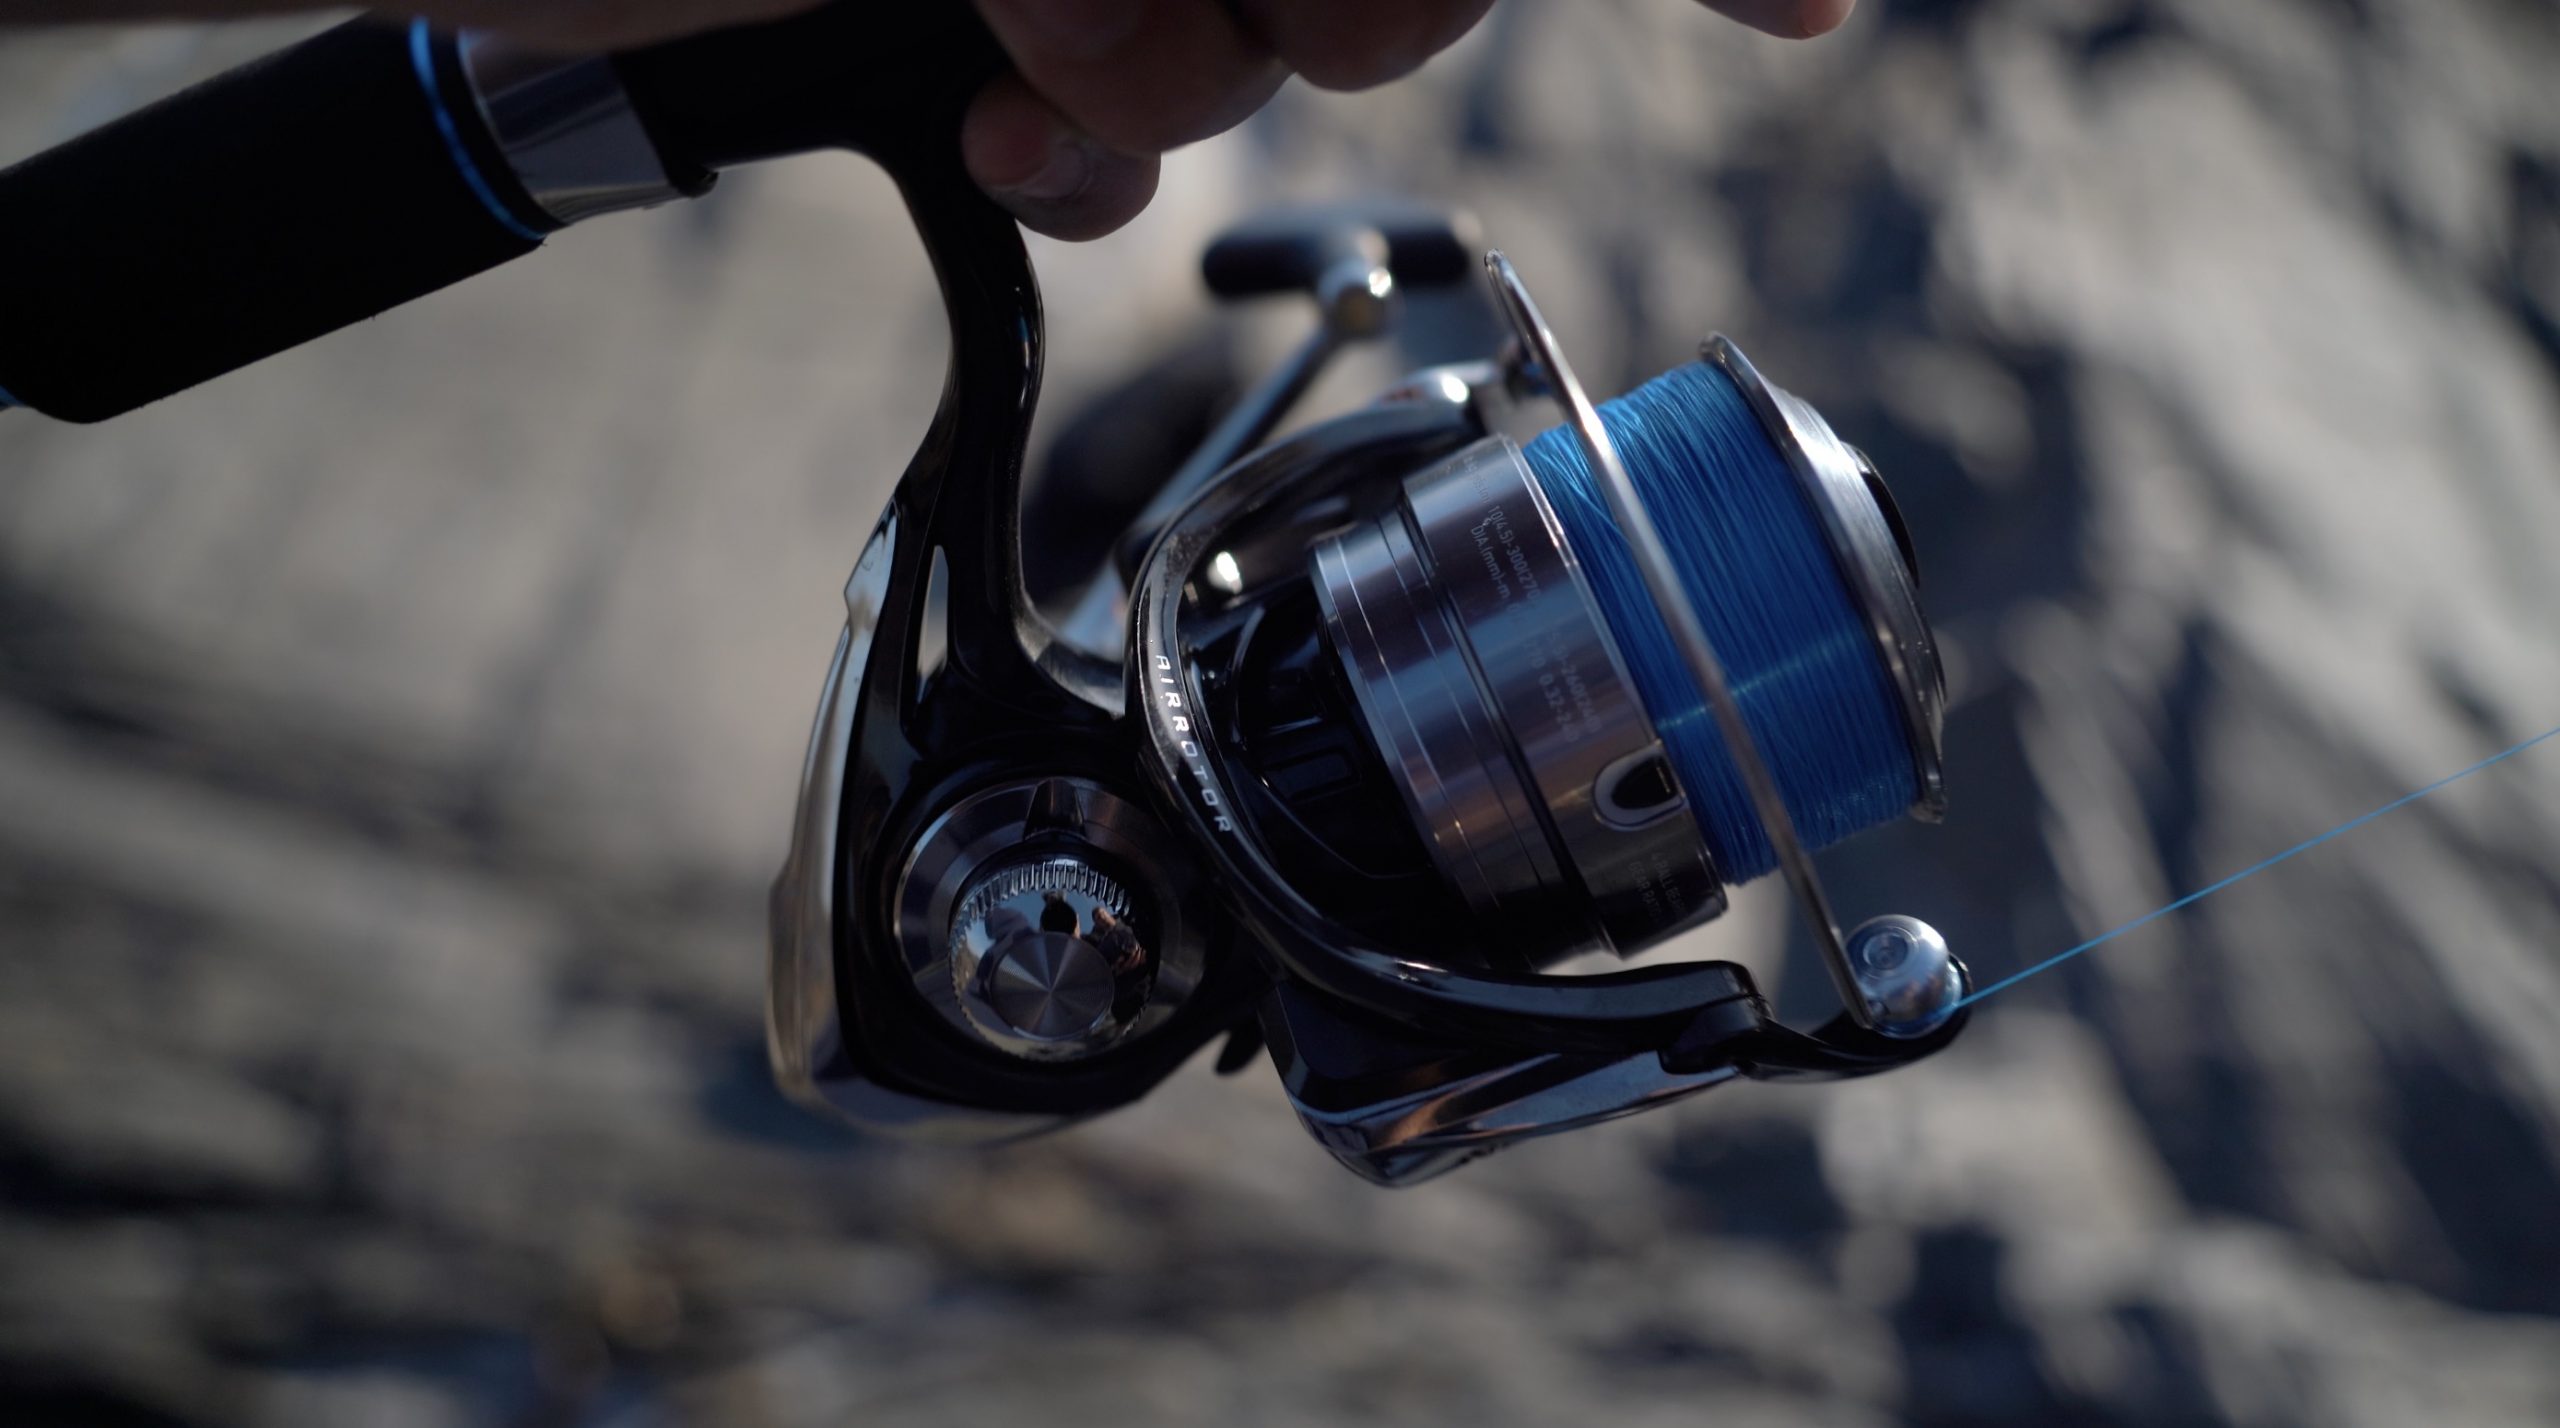 Best Spinning Reels, UK Review